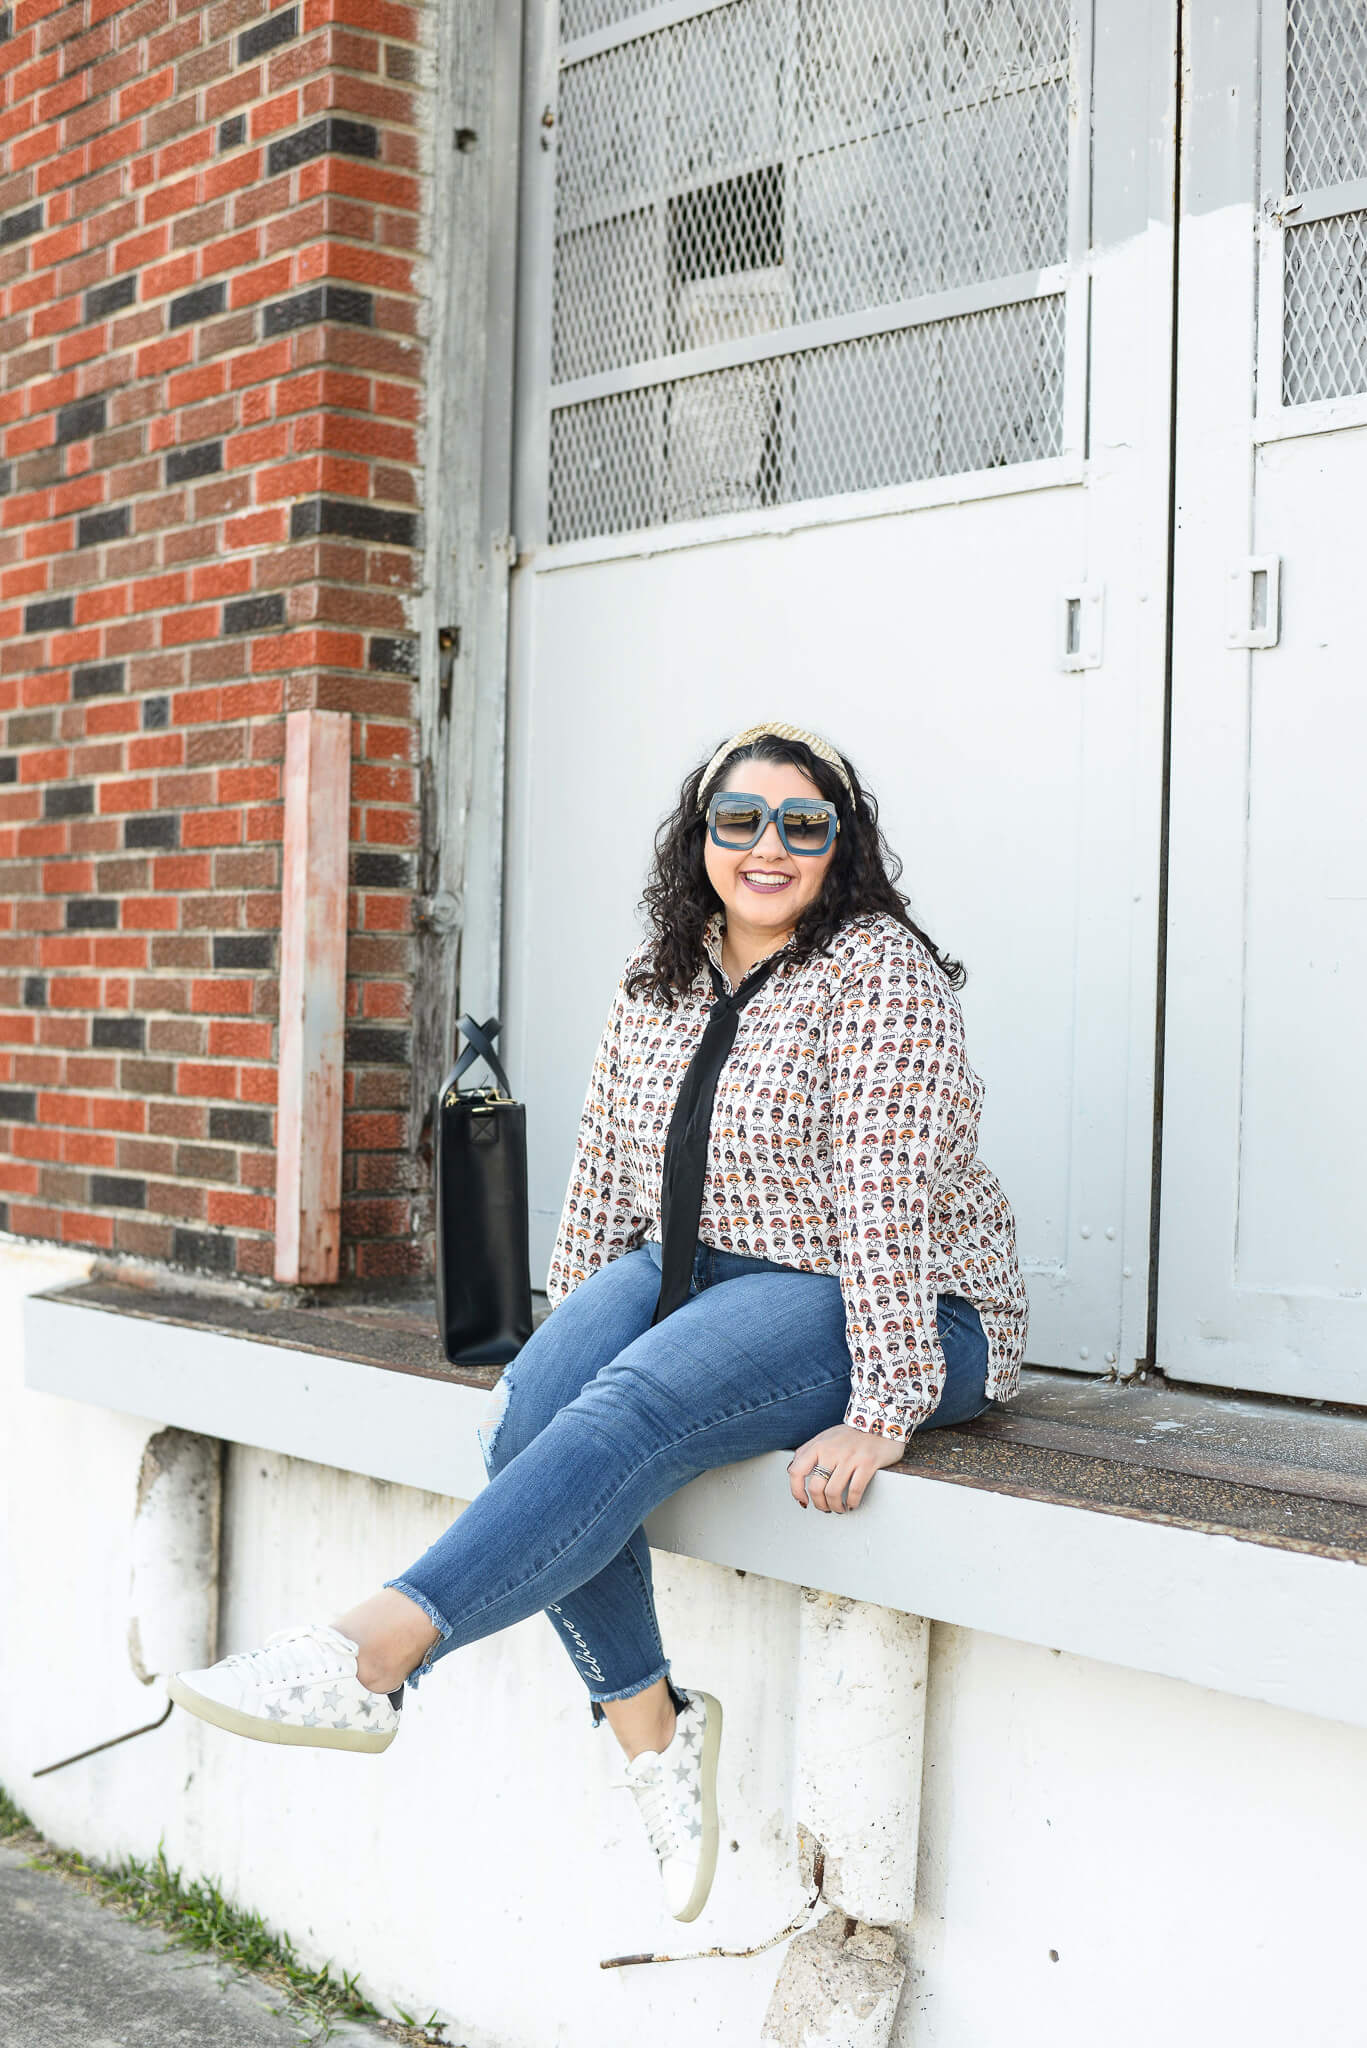 This week, I challenged myself to shop my closet for plus size finds that I already had to make two different outfits from this printed blouse